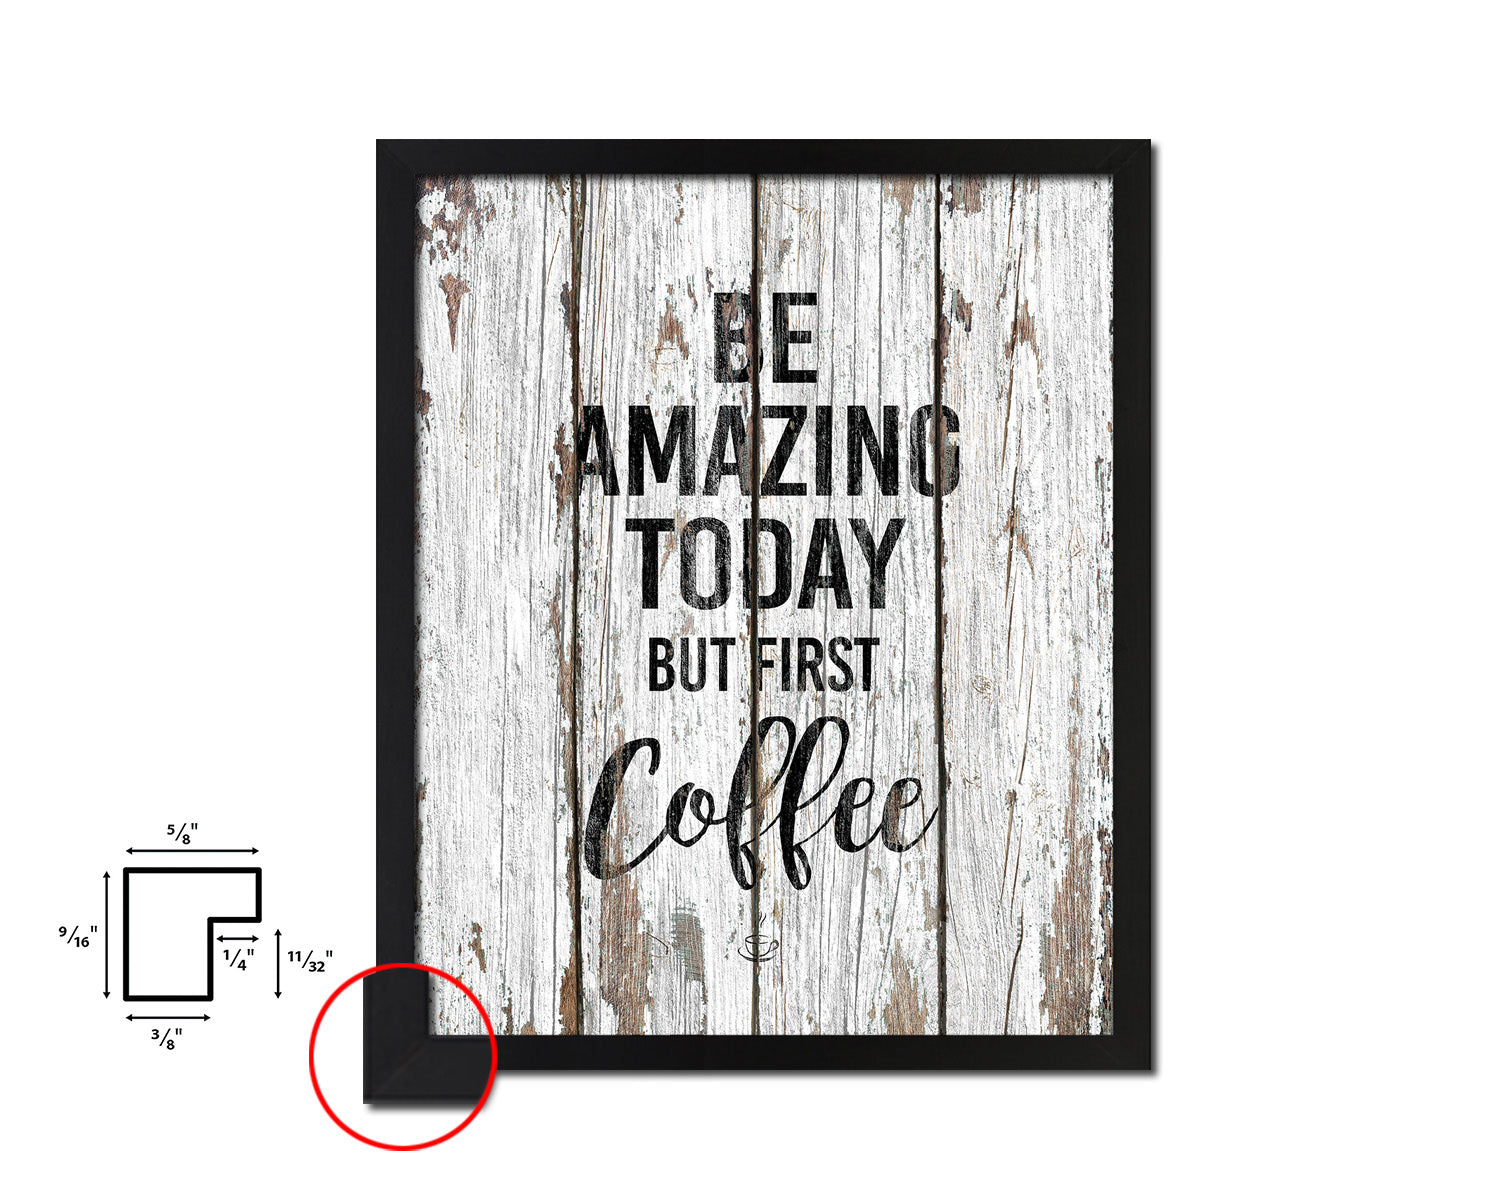 Be amazing today but first coffee Quote Framed Artwork Print Wall Decor Art Gifts